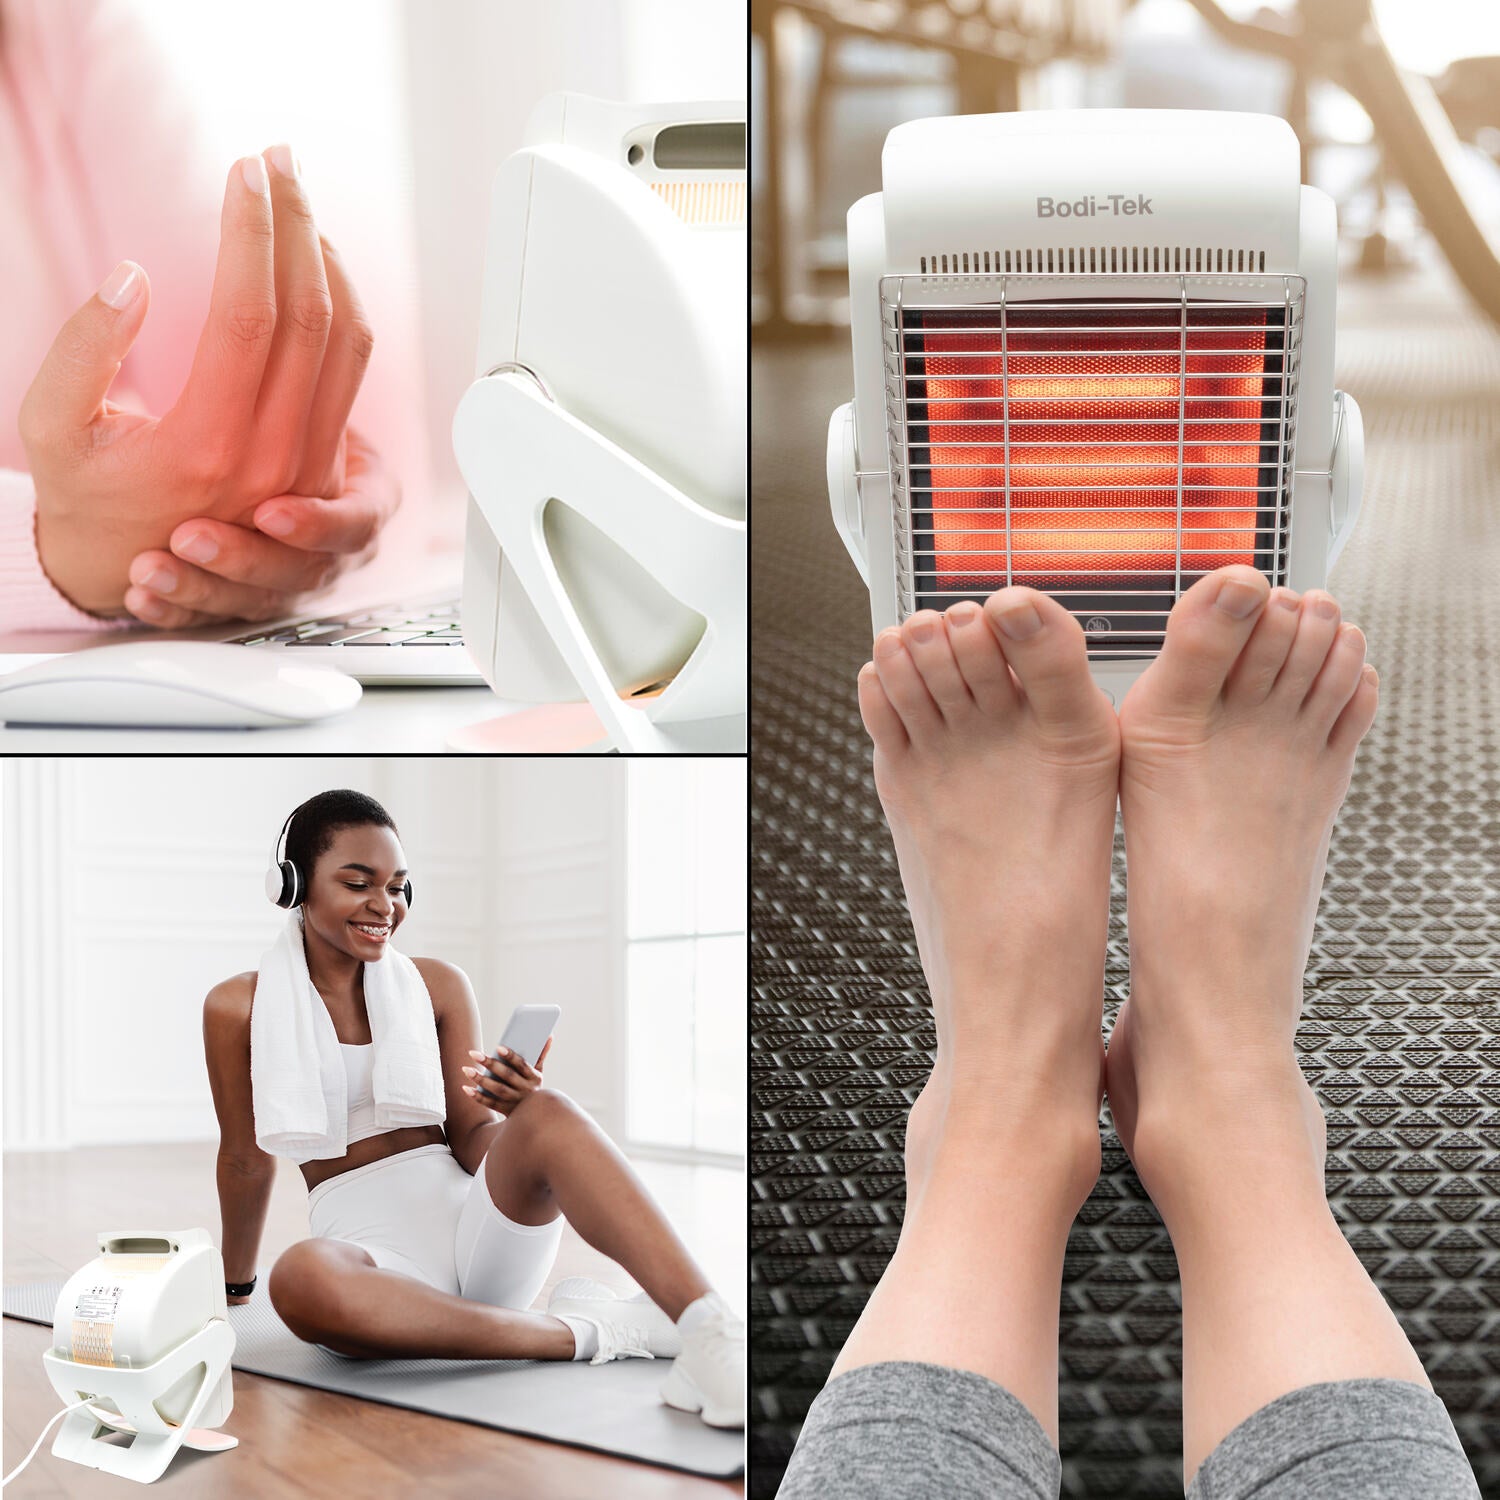 Infrared light heat lamp in use on hands, feet and knees.